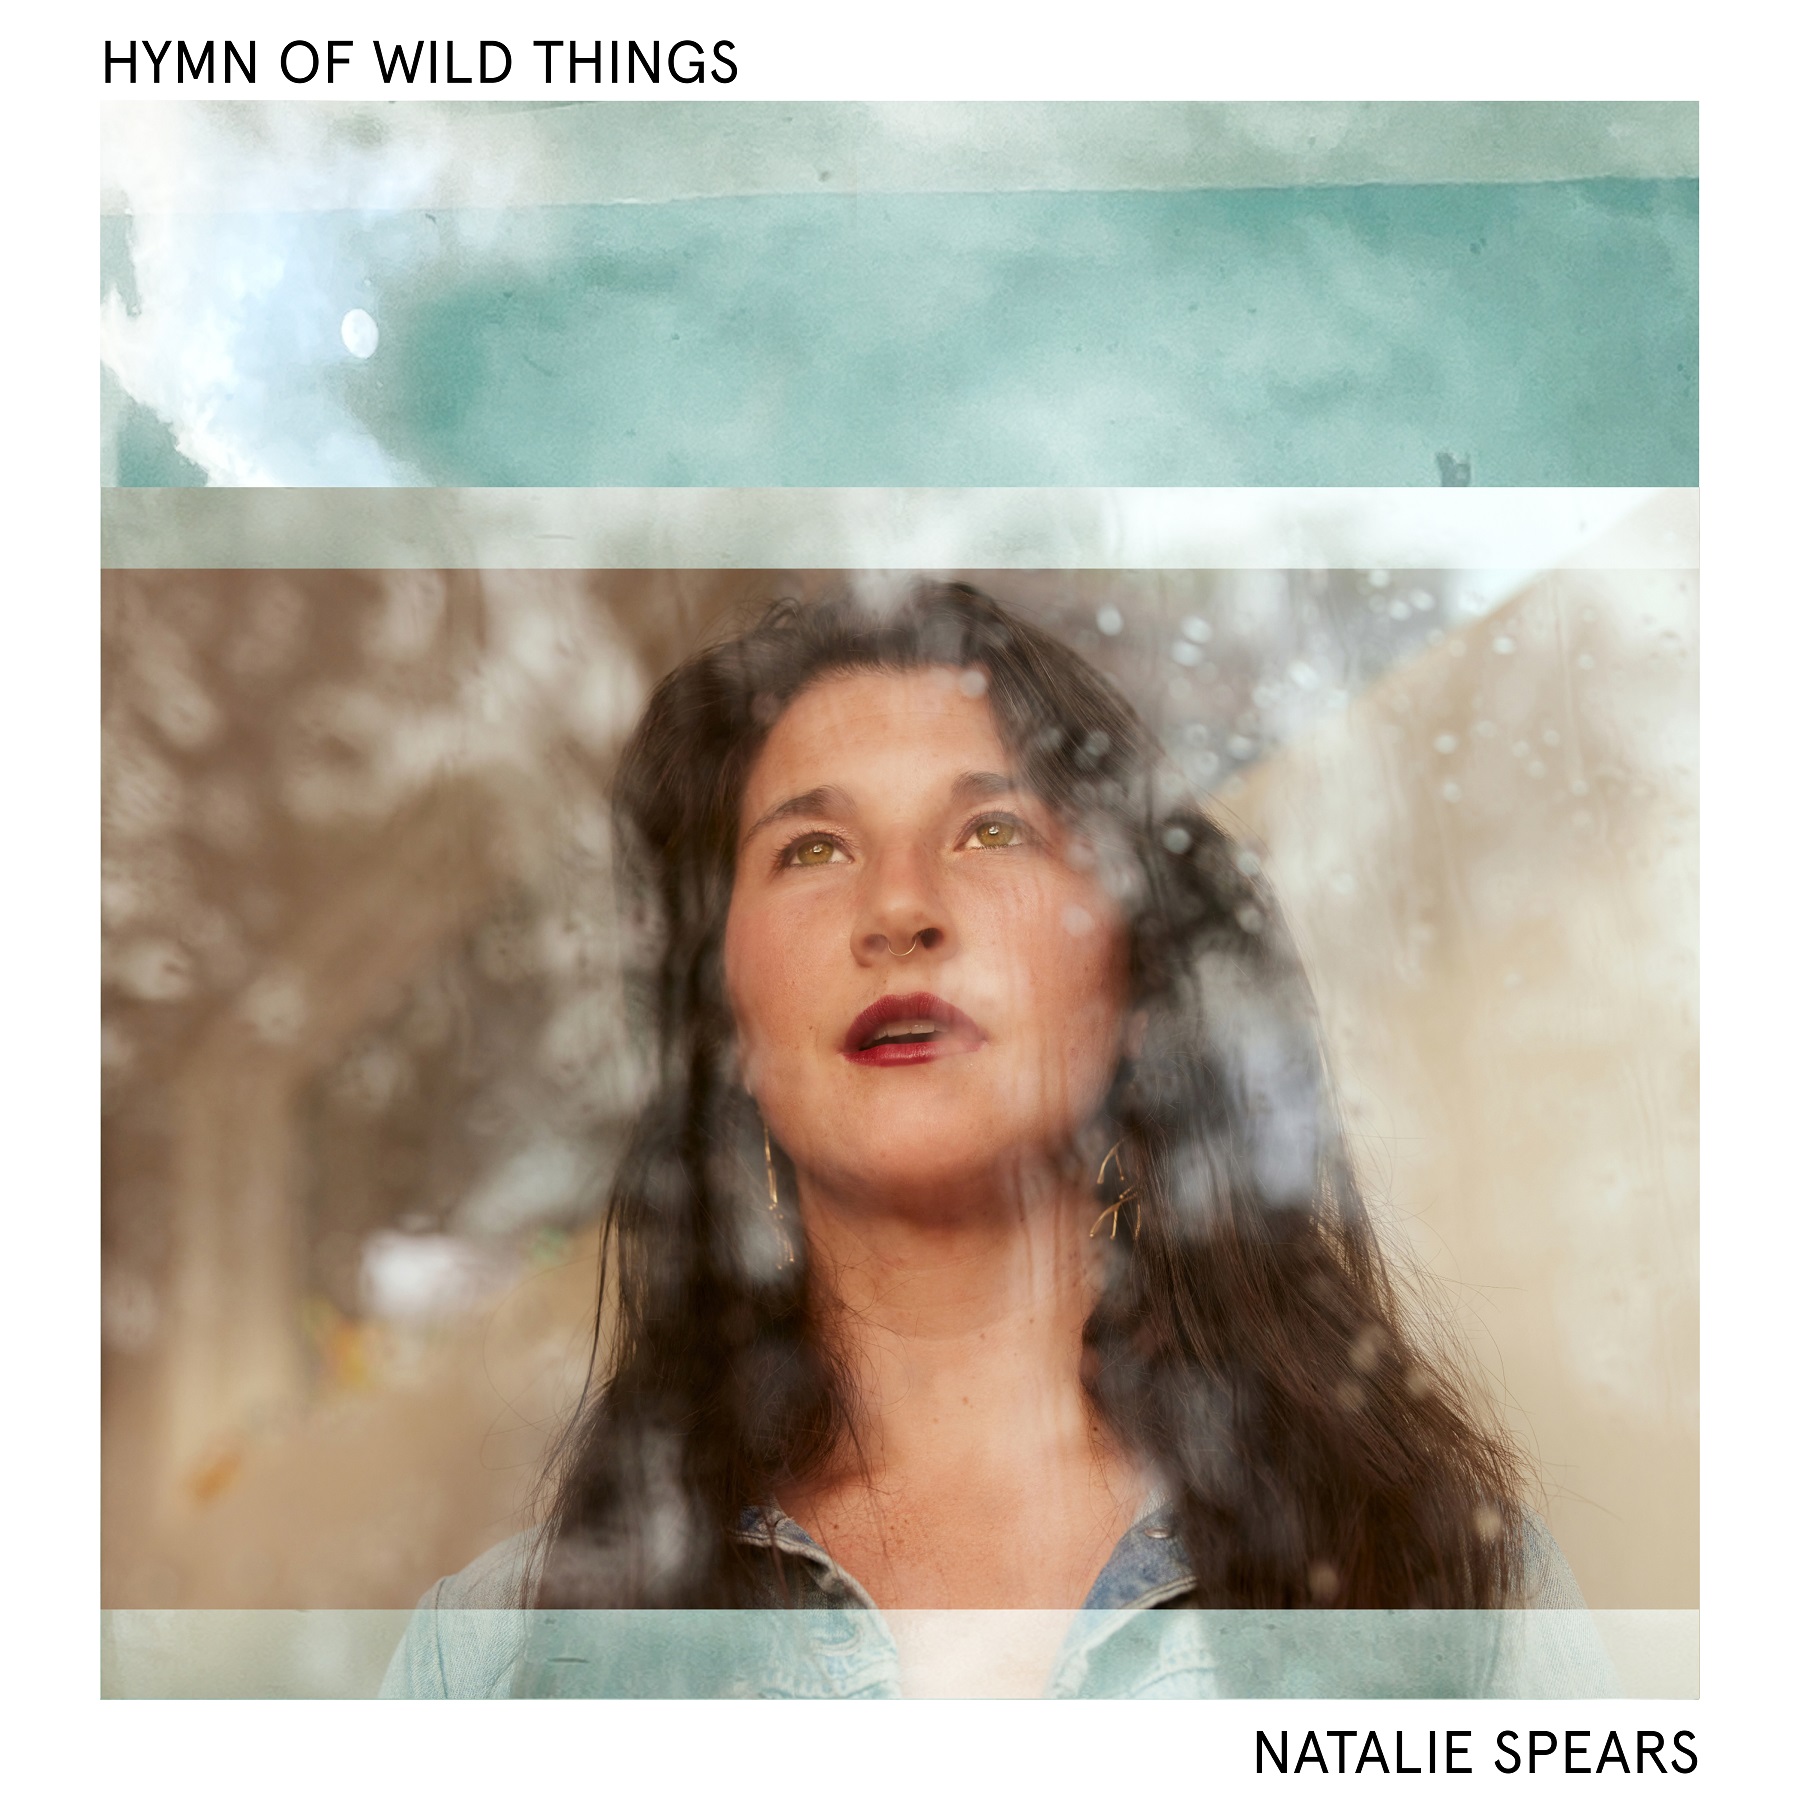 Natalie Spears' Debut Album "Hymn of Wild Things" Captures Colorado's Natural Beauty